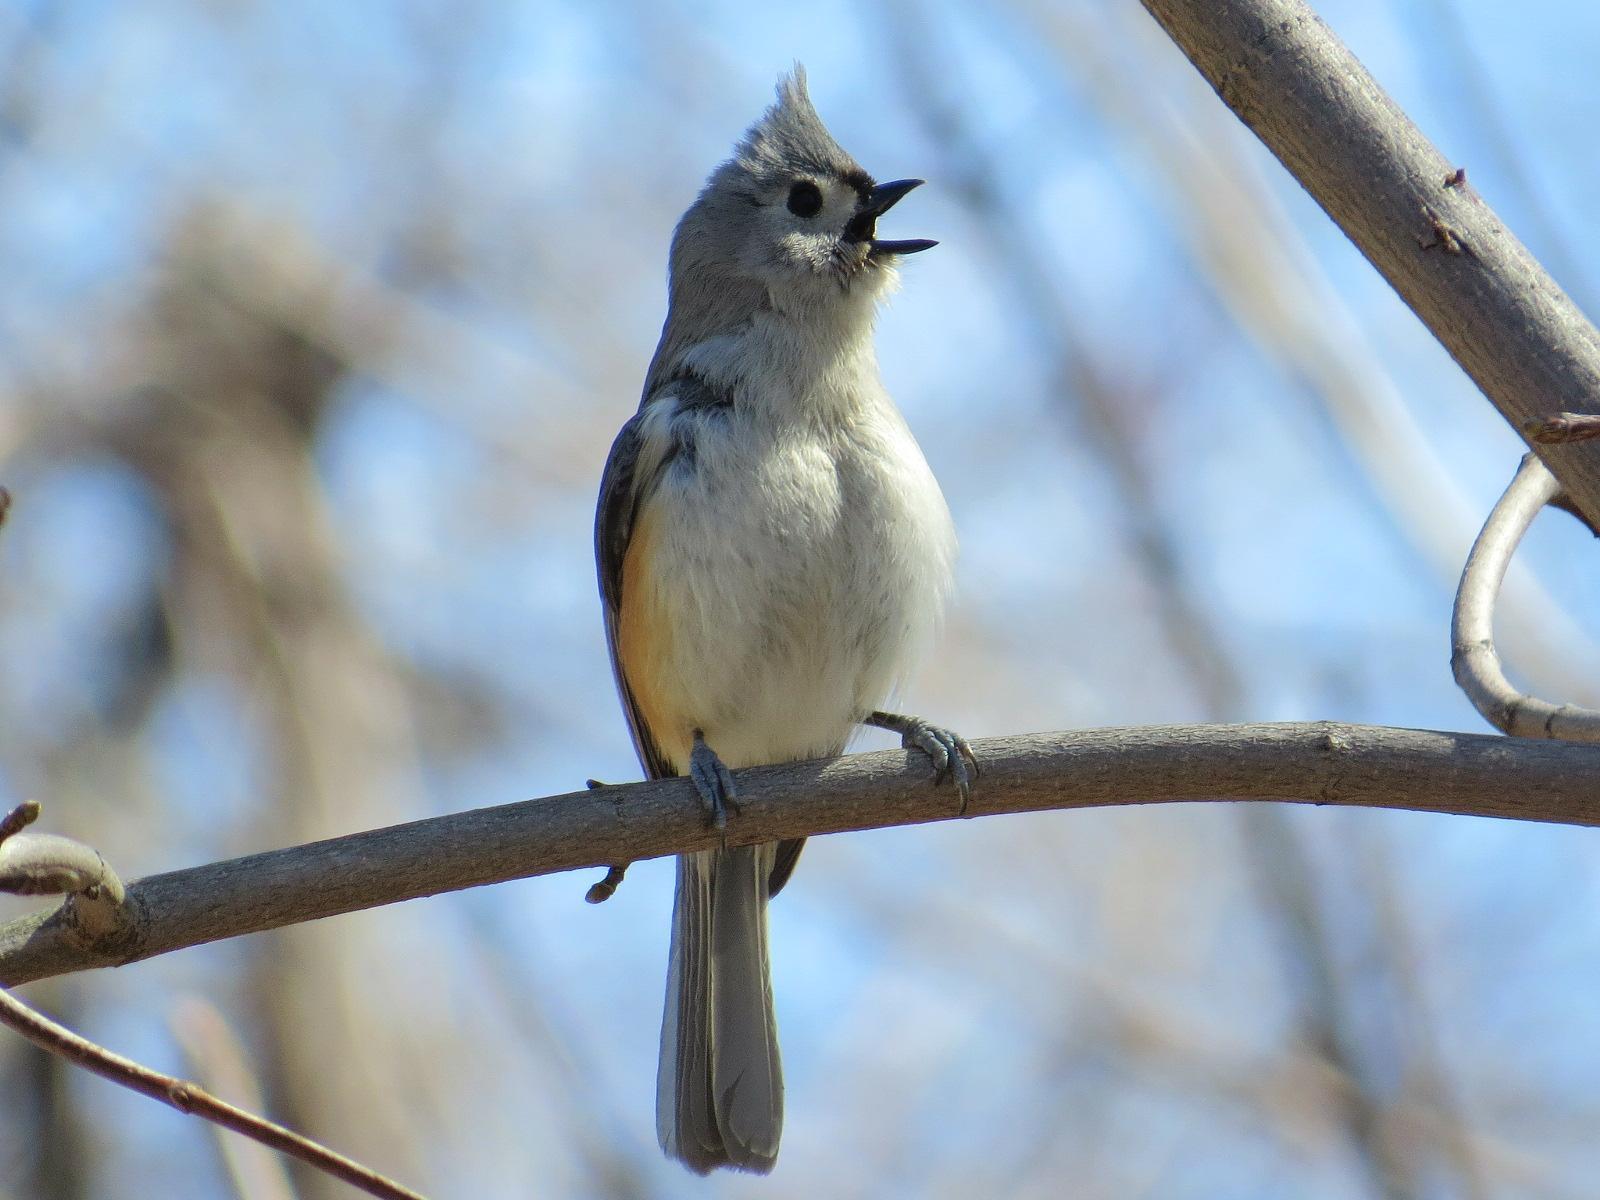 Tufted Titmouse Photo by Kathy Wooding